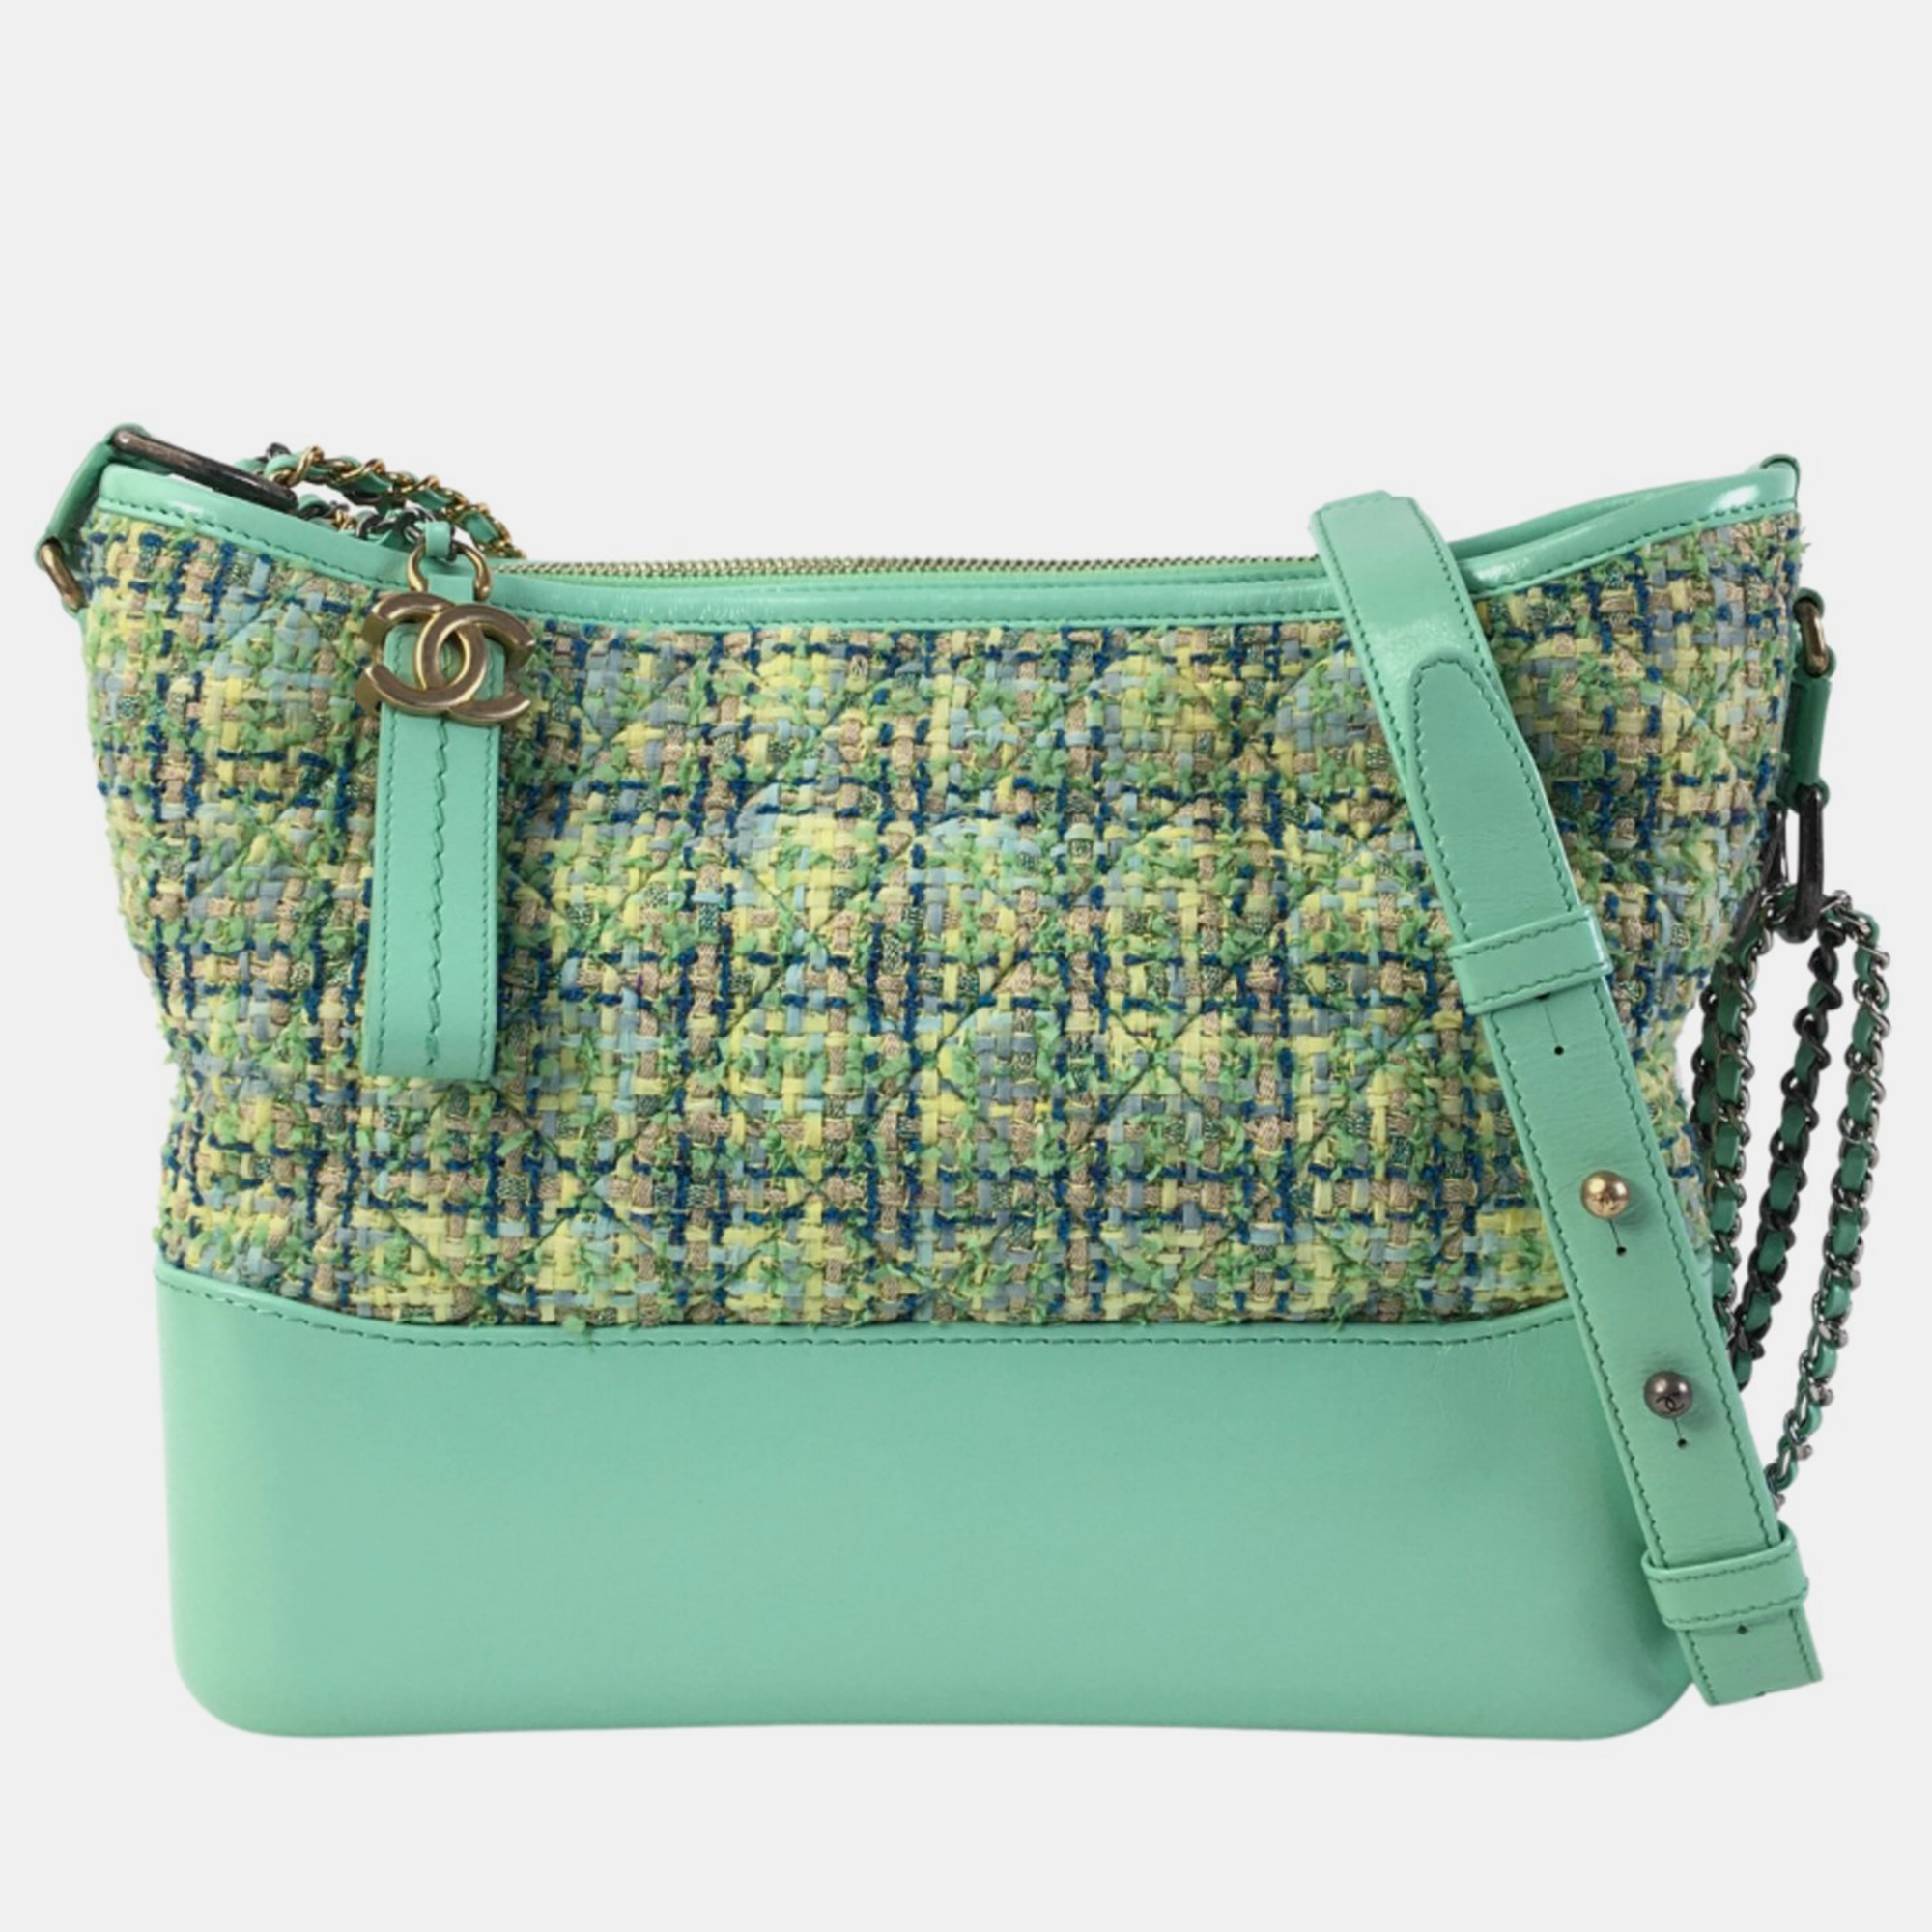 Chanel green tweed and leather medium gabrielle shoulder bags